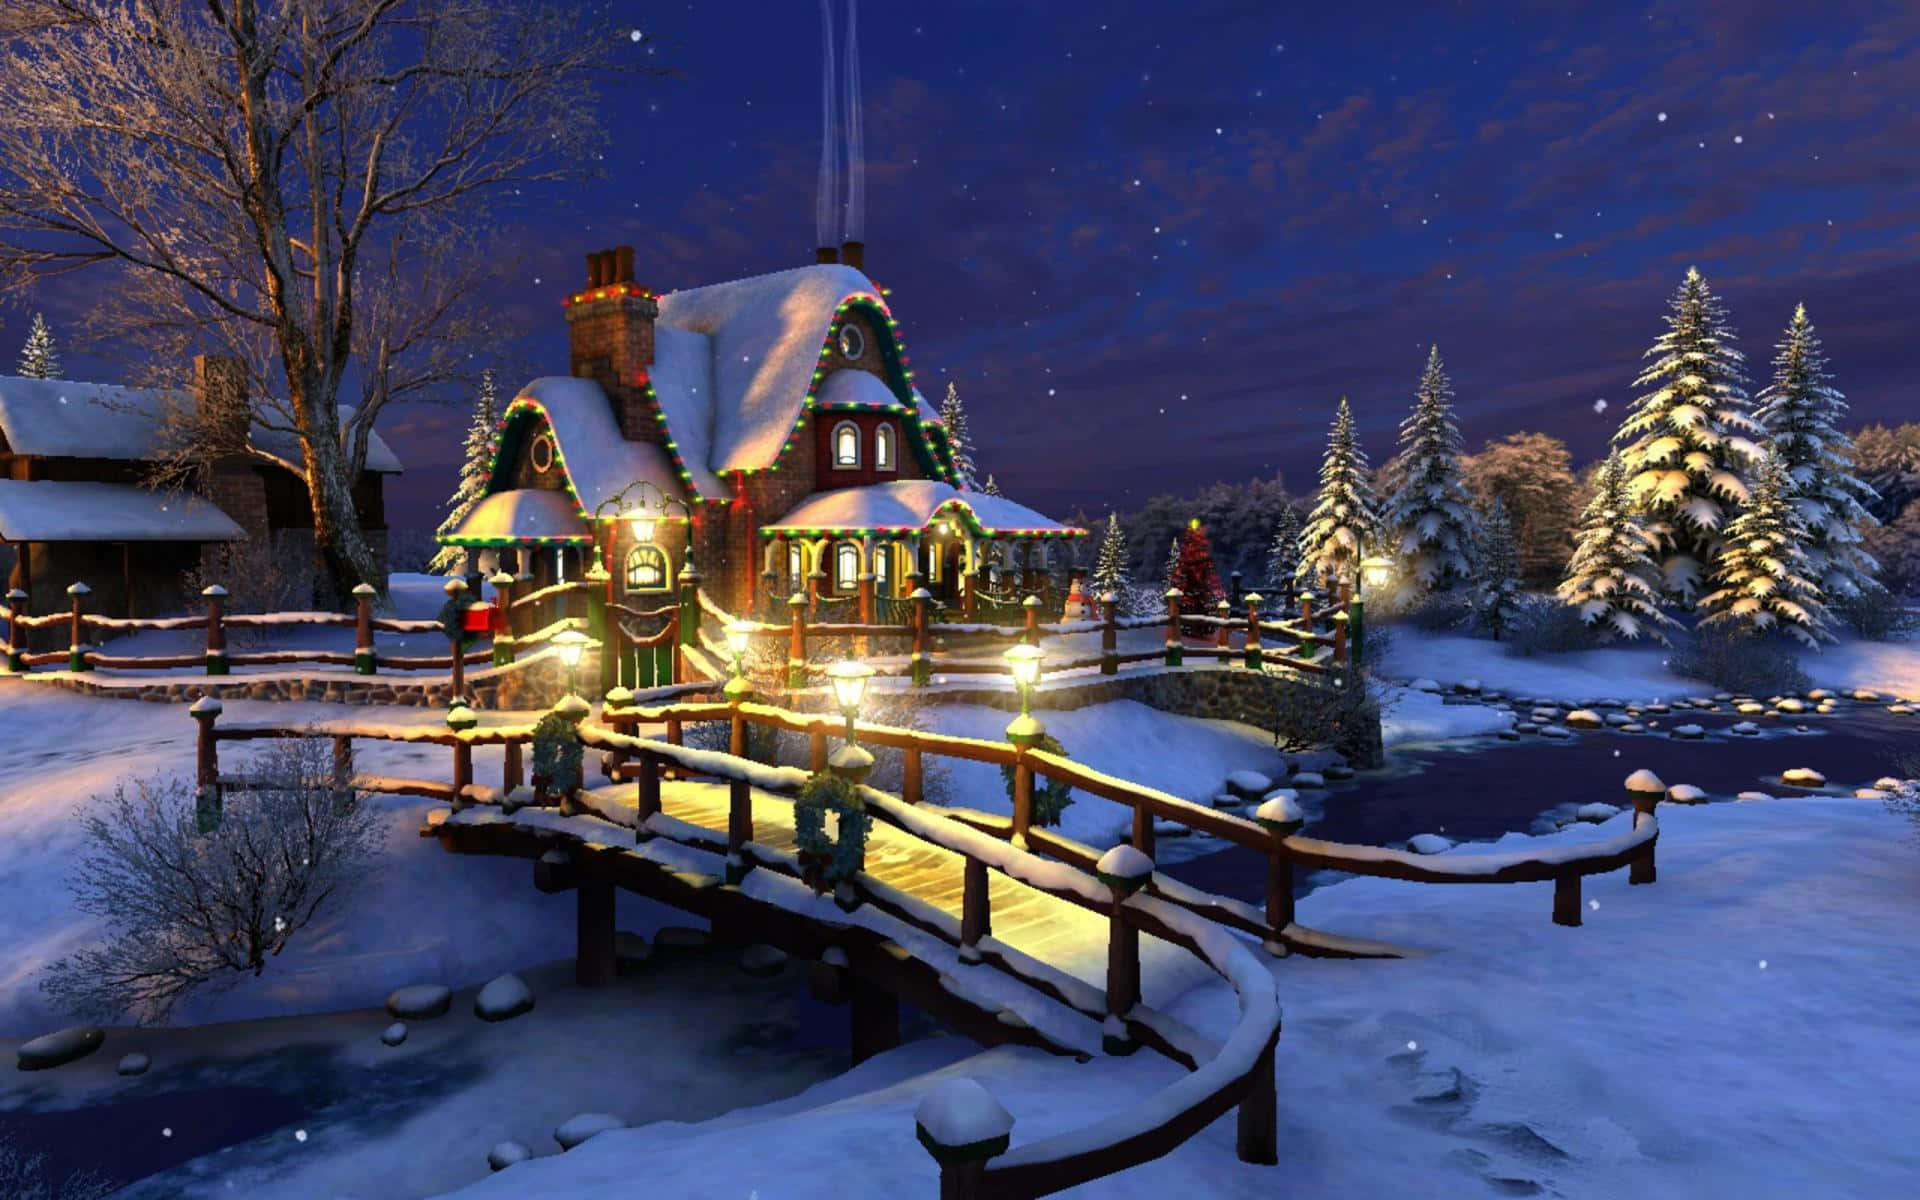 Celebrate The Coming Of The Season With A Beautiful Landscape! Background